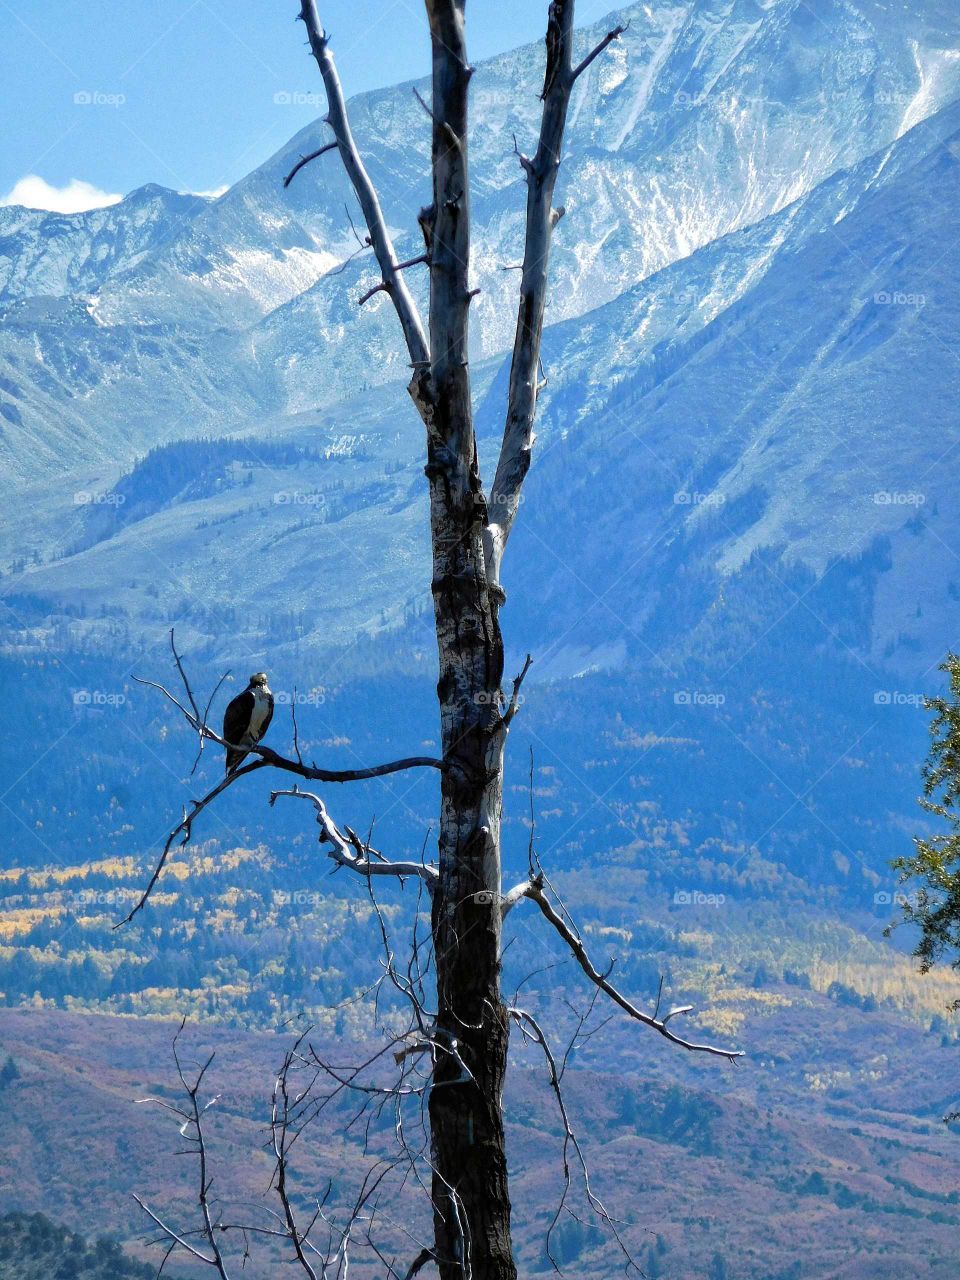 Lone eagle scanning the valley